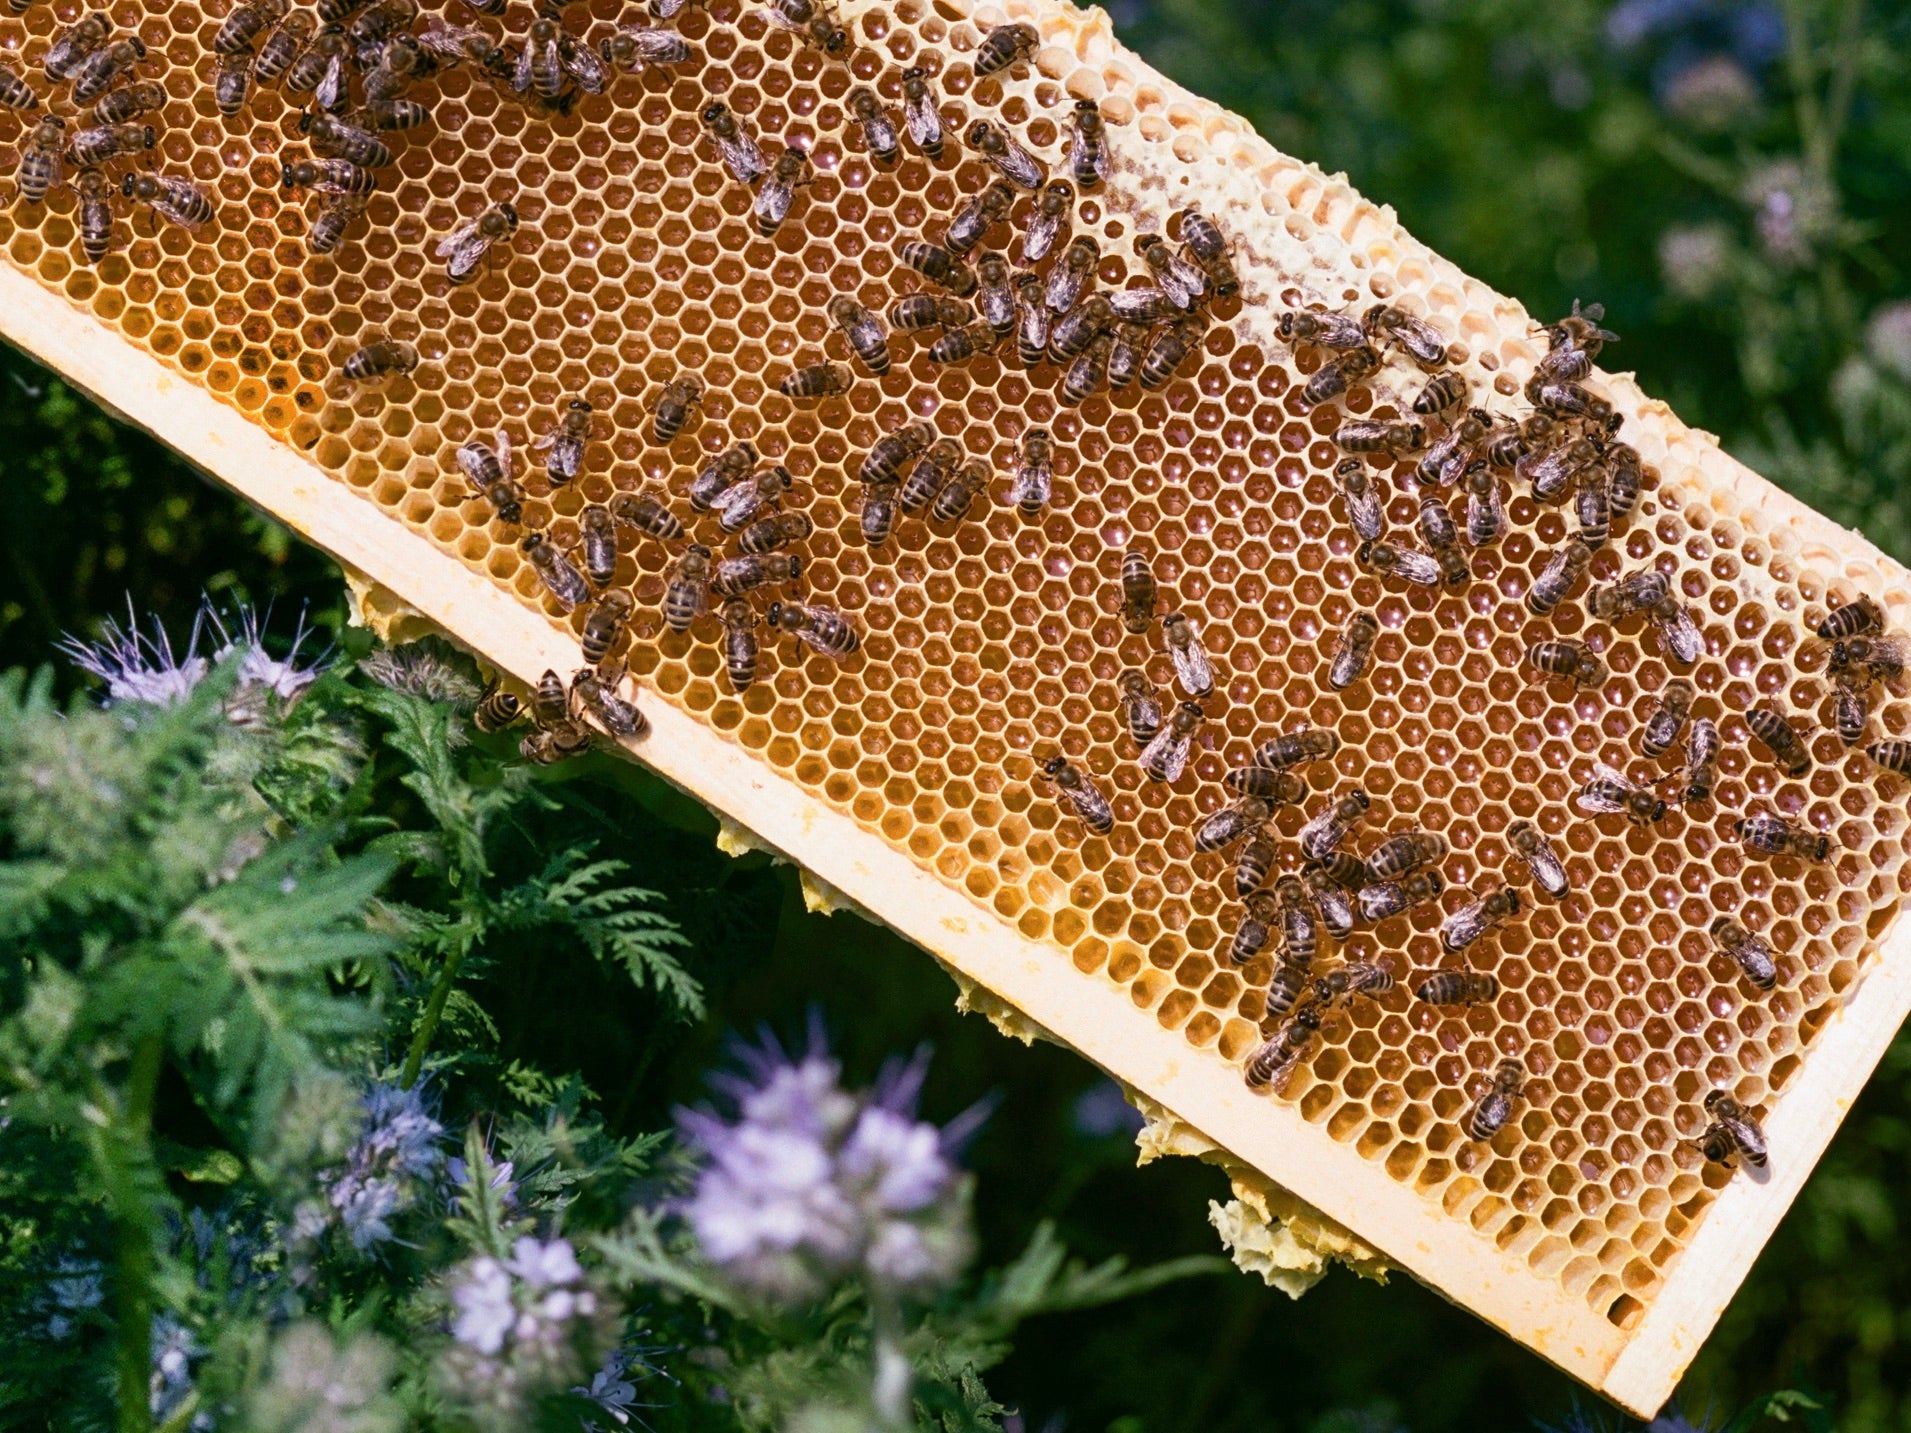 How To Support The Honey Bees – Gisou